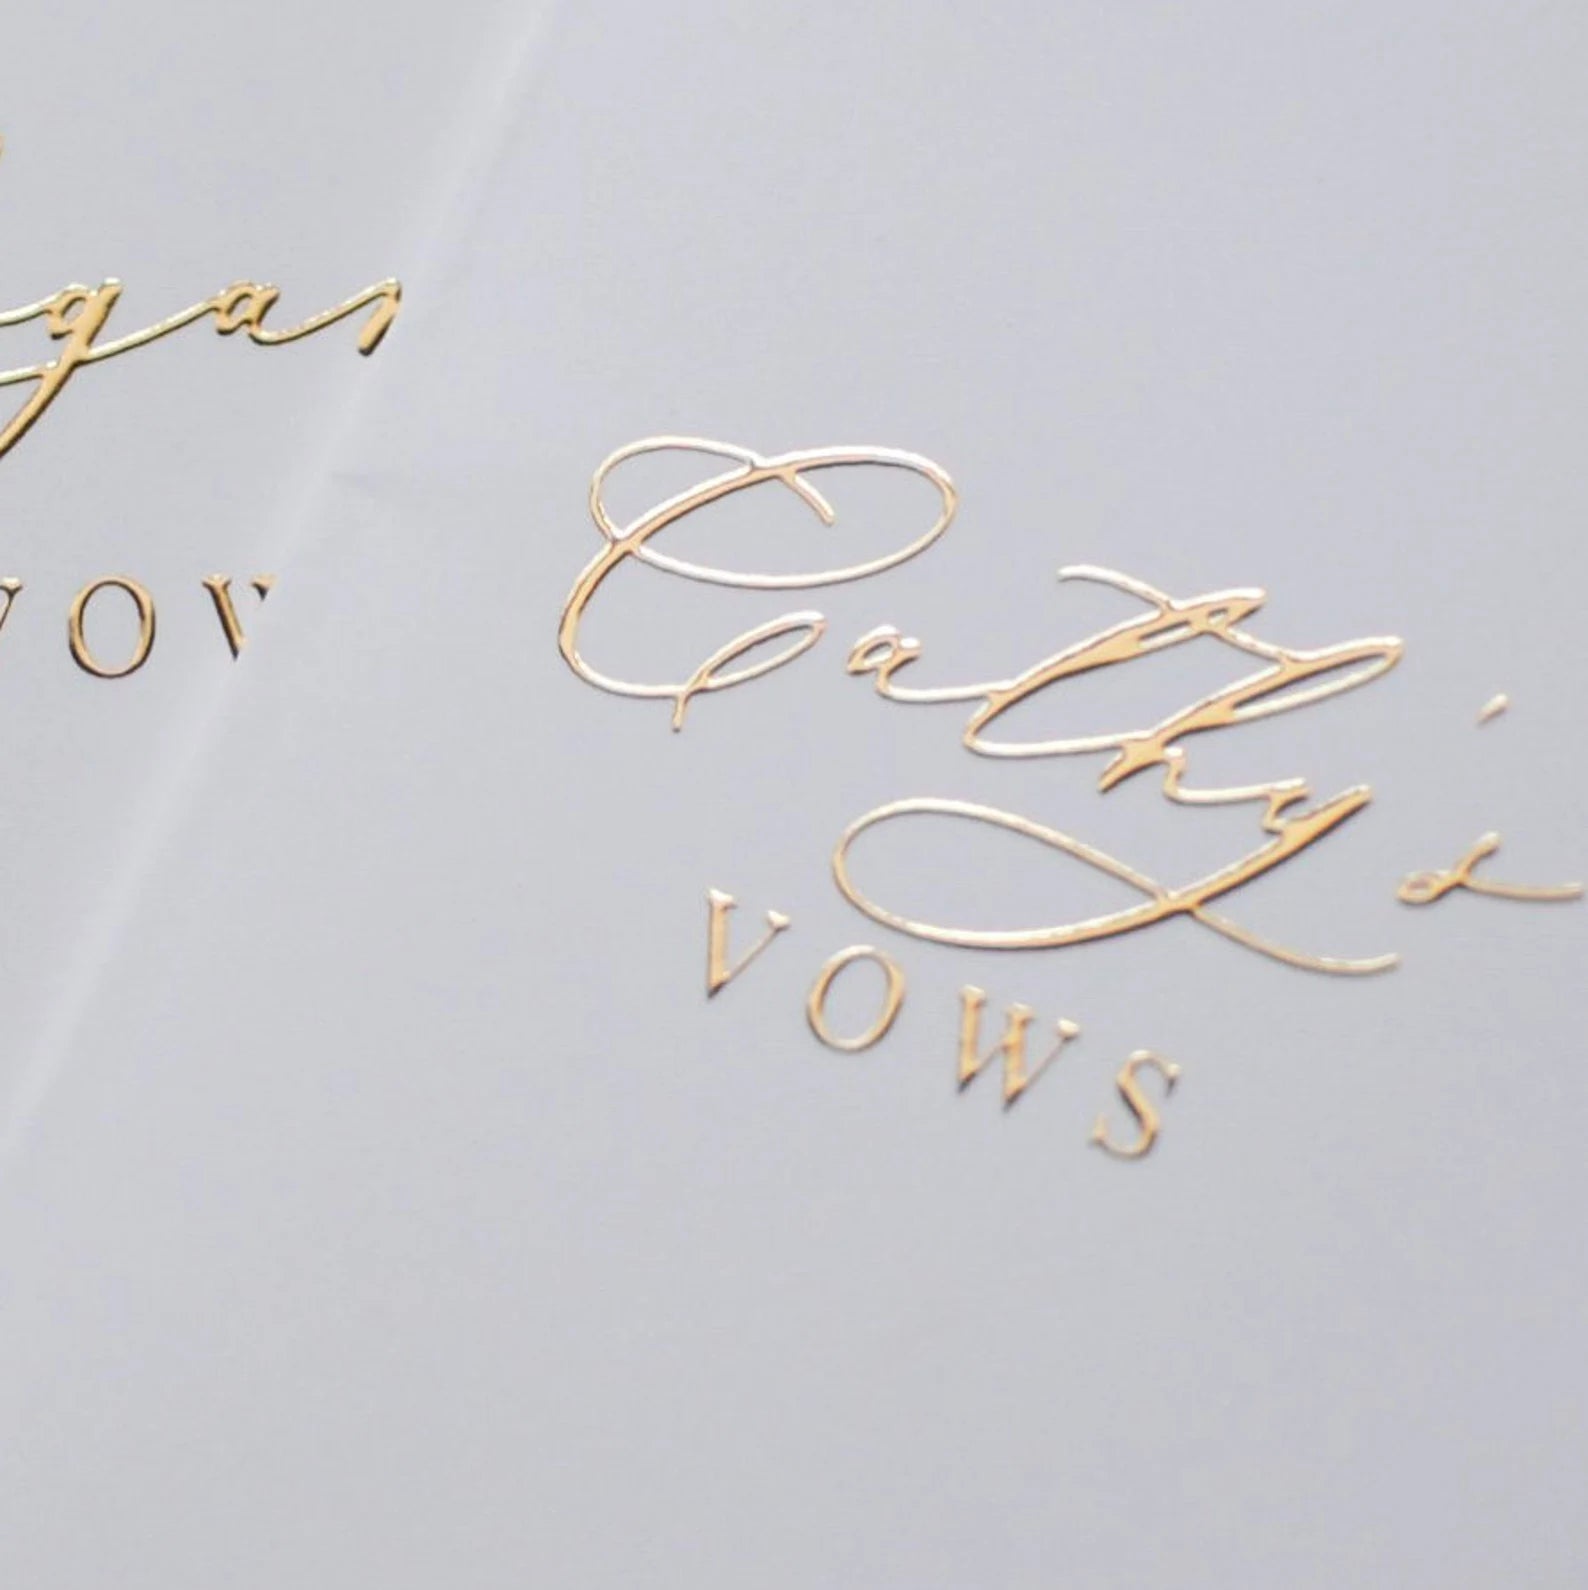 Personalized Foil Printed Vow Books - Set of Two